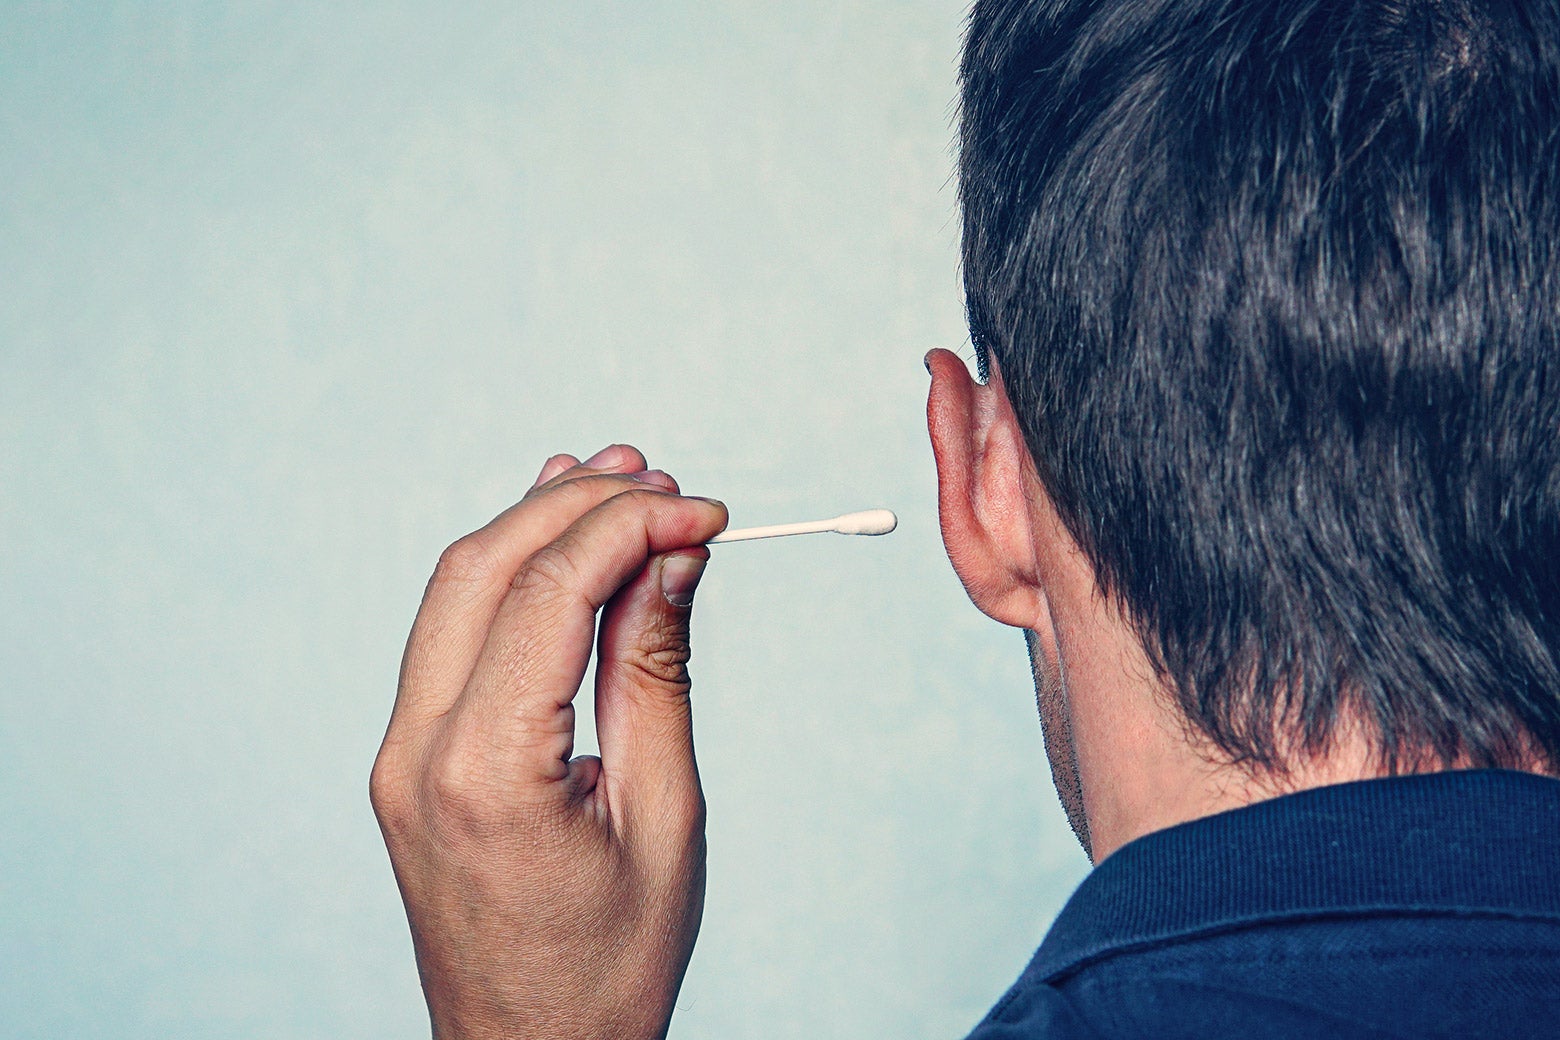 Why Shouldn’t You Stick Q-tips in Your Ears?